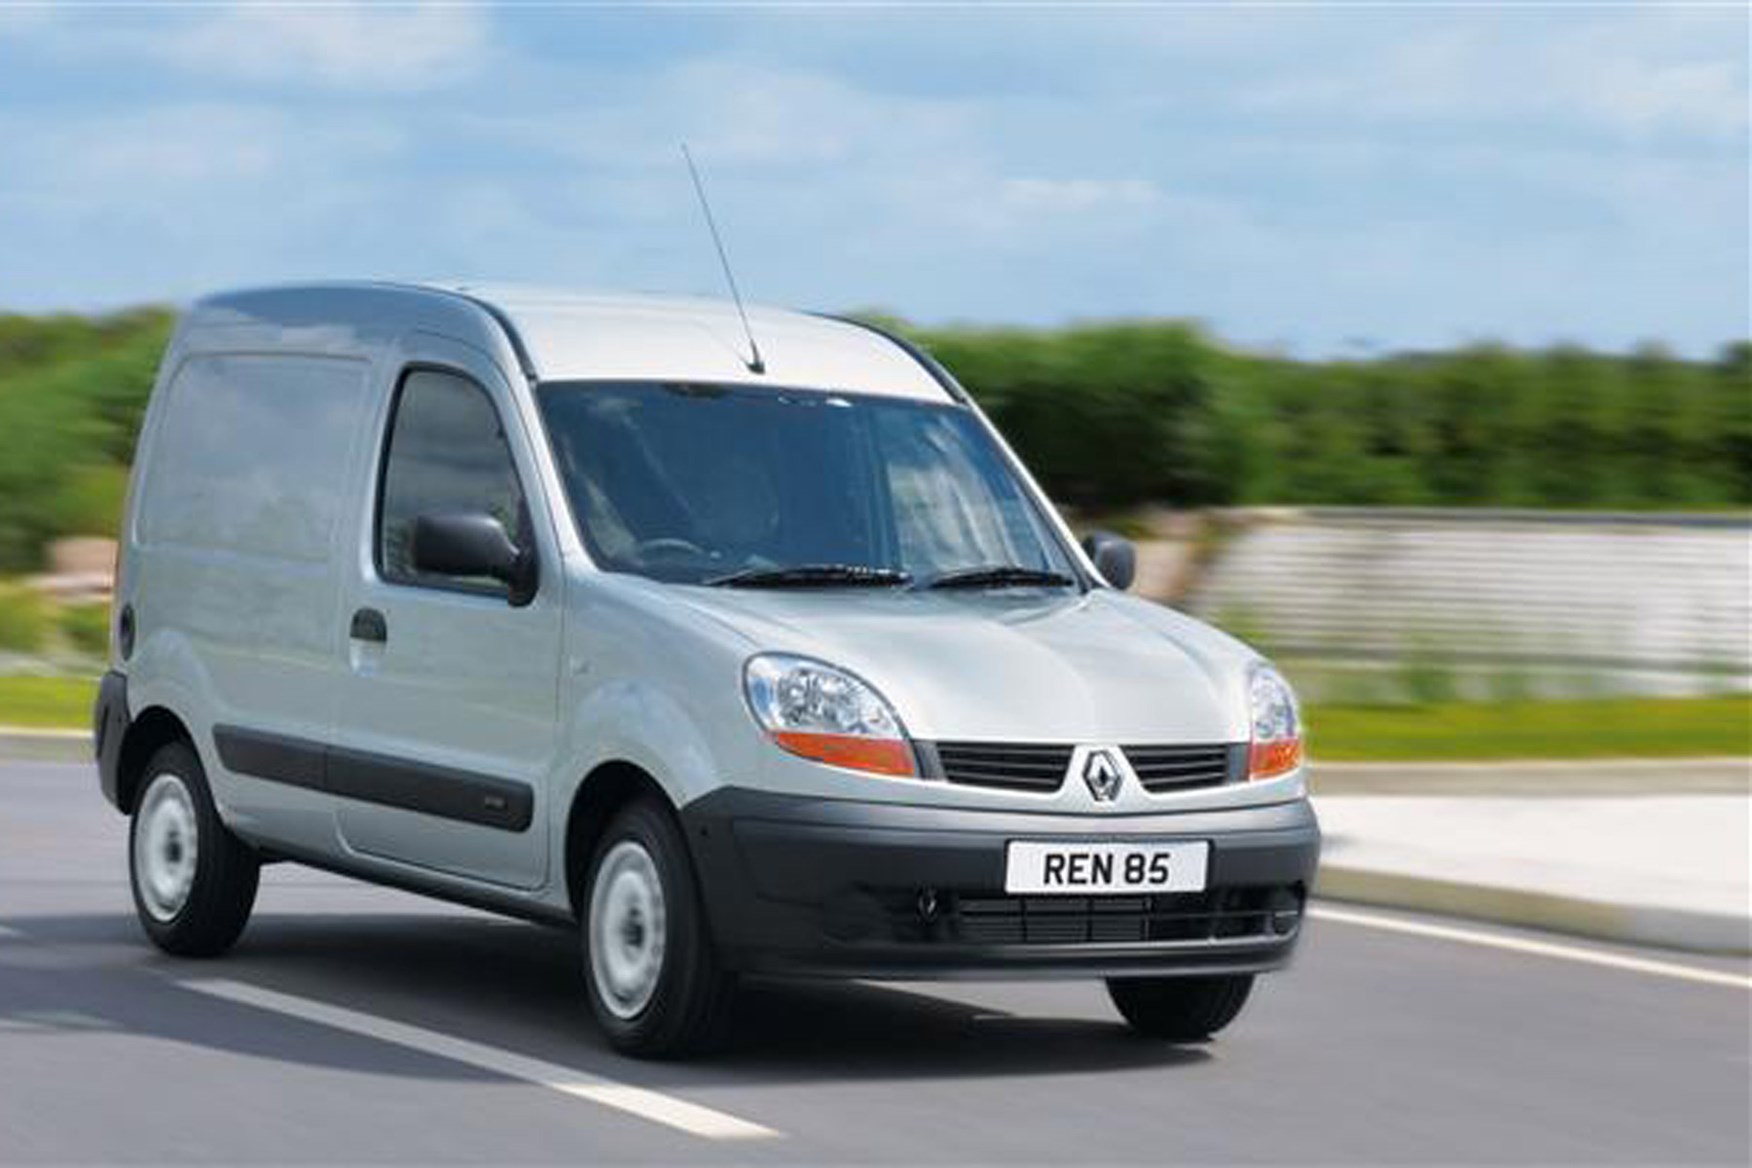 Renault Kangoo review on Parkers Vans - on the road